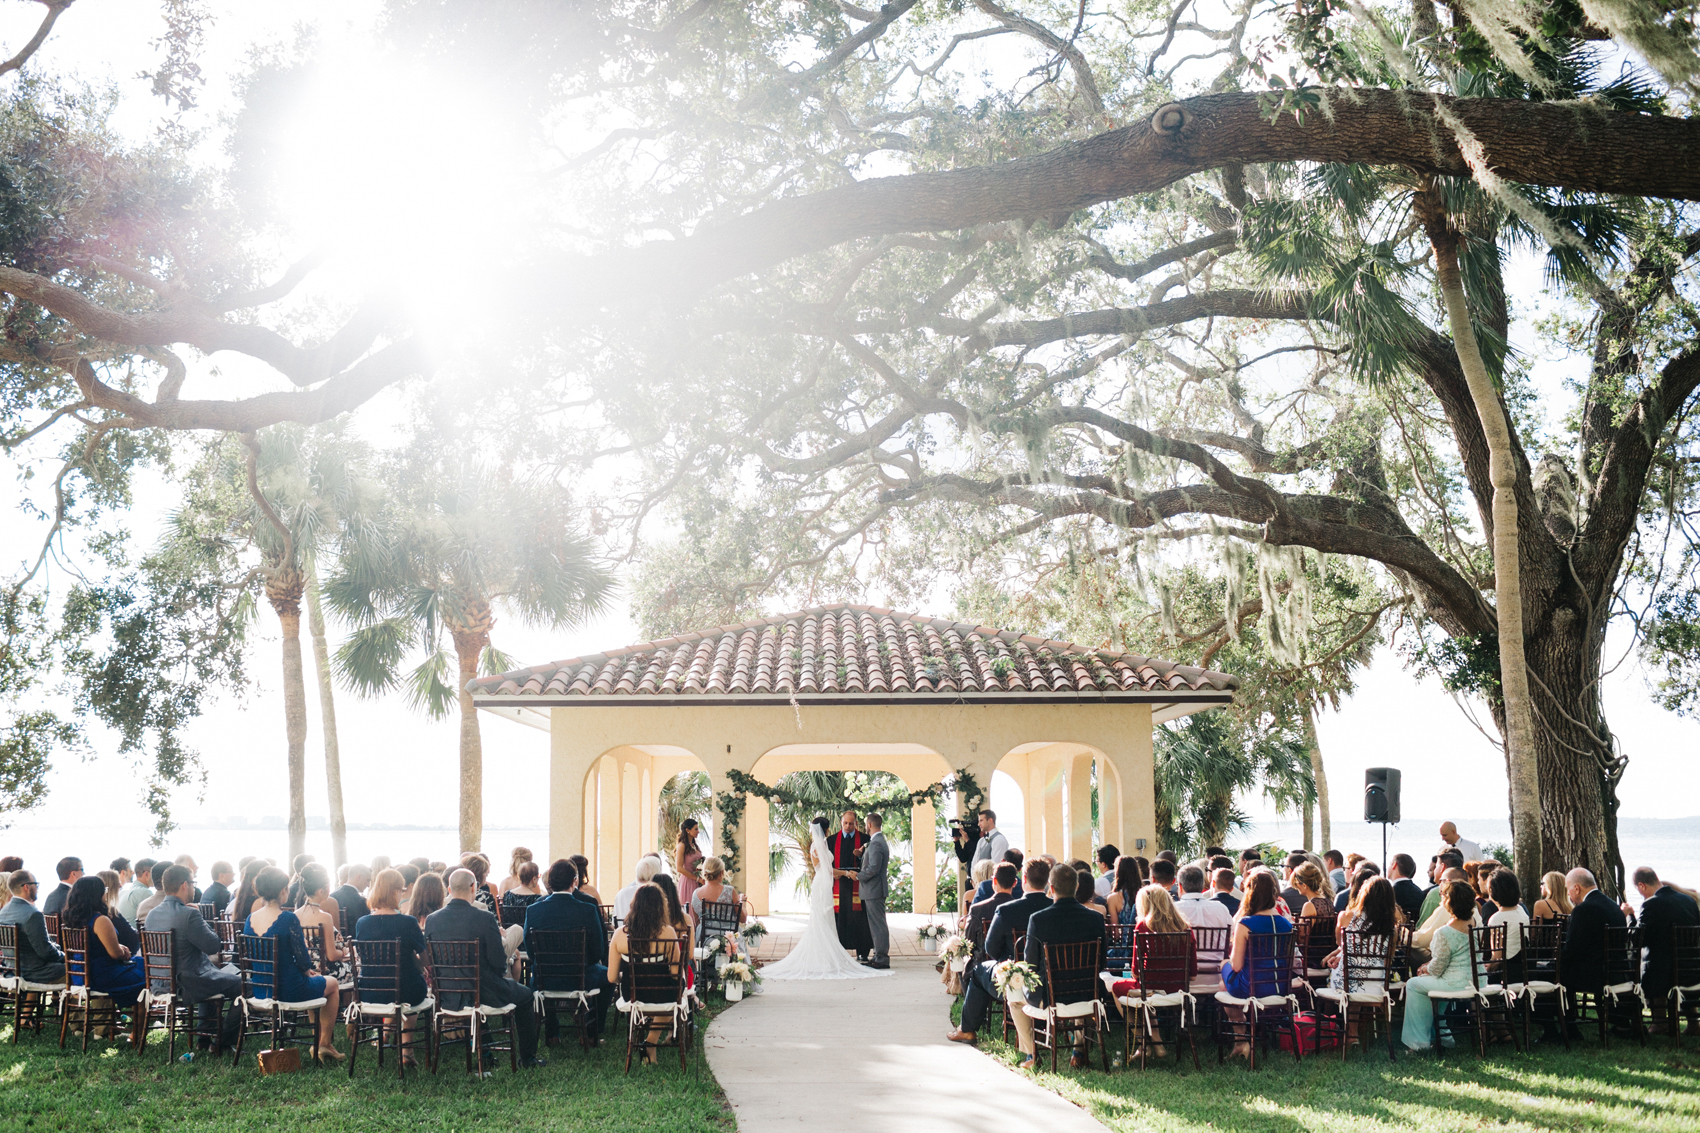 Waterfront ceremony views at the historic Powel Crosley Estate